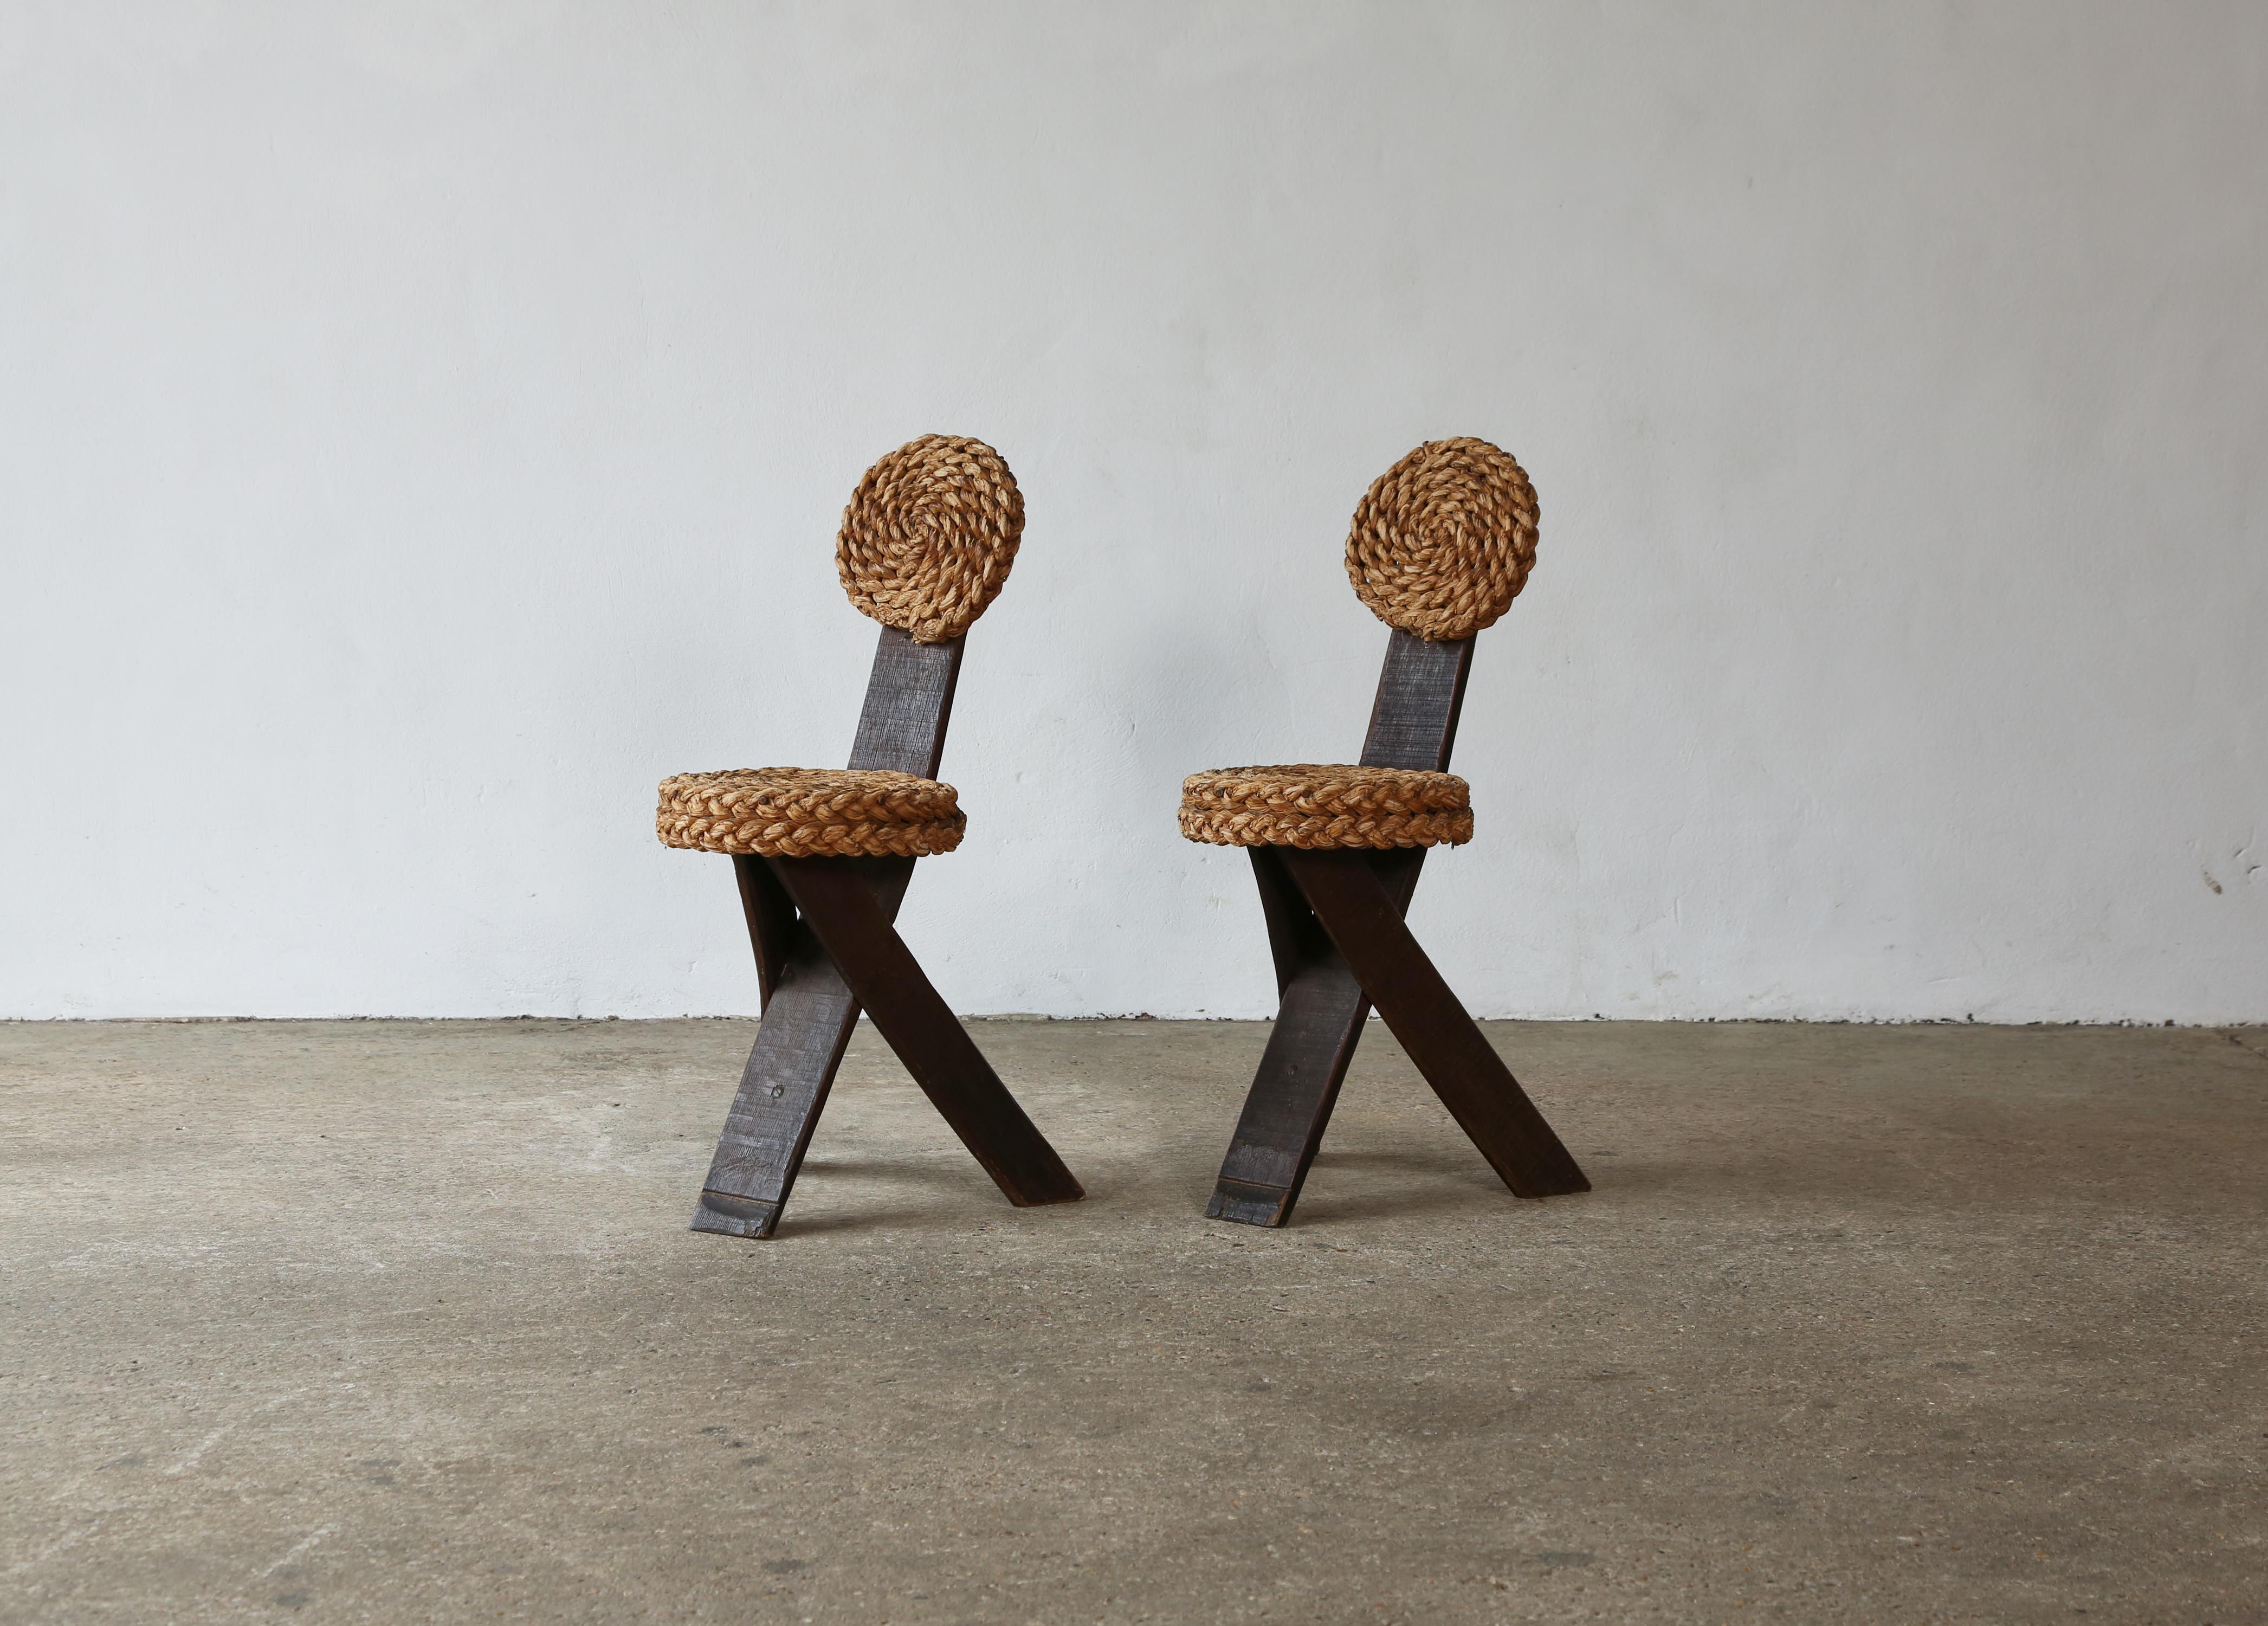 Pair of Audoux & Minet Tripod Rope Chairs, France, 1950s For Sale 1